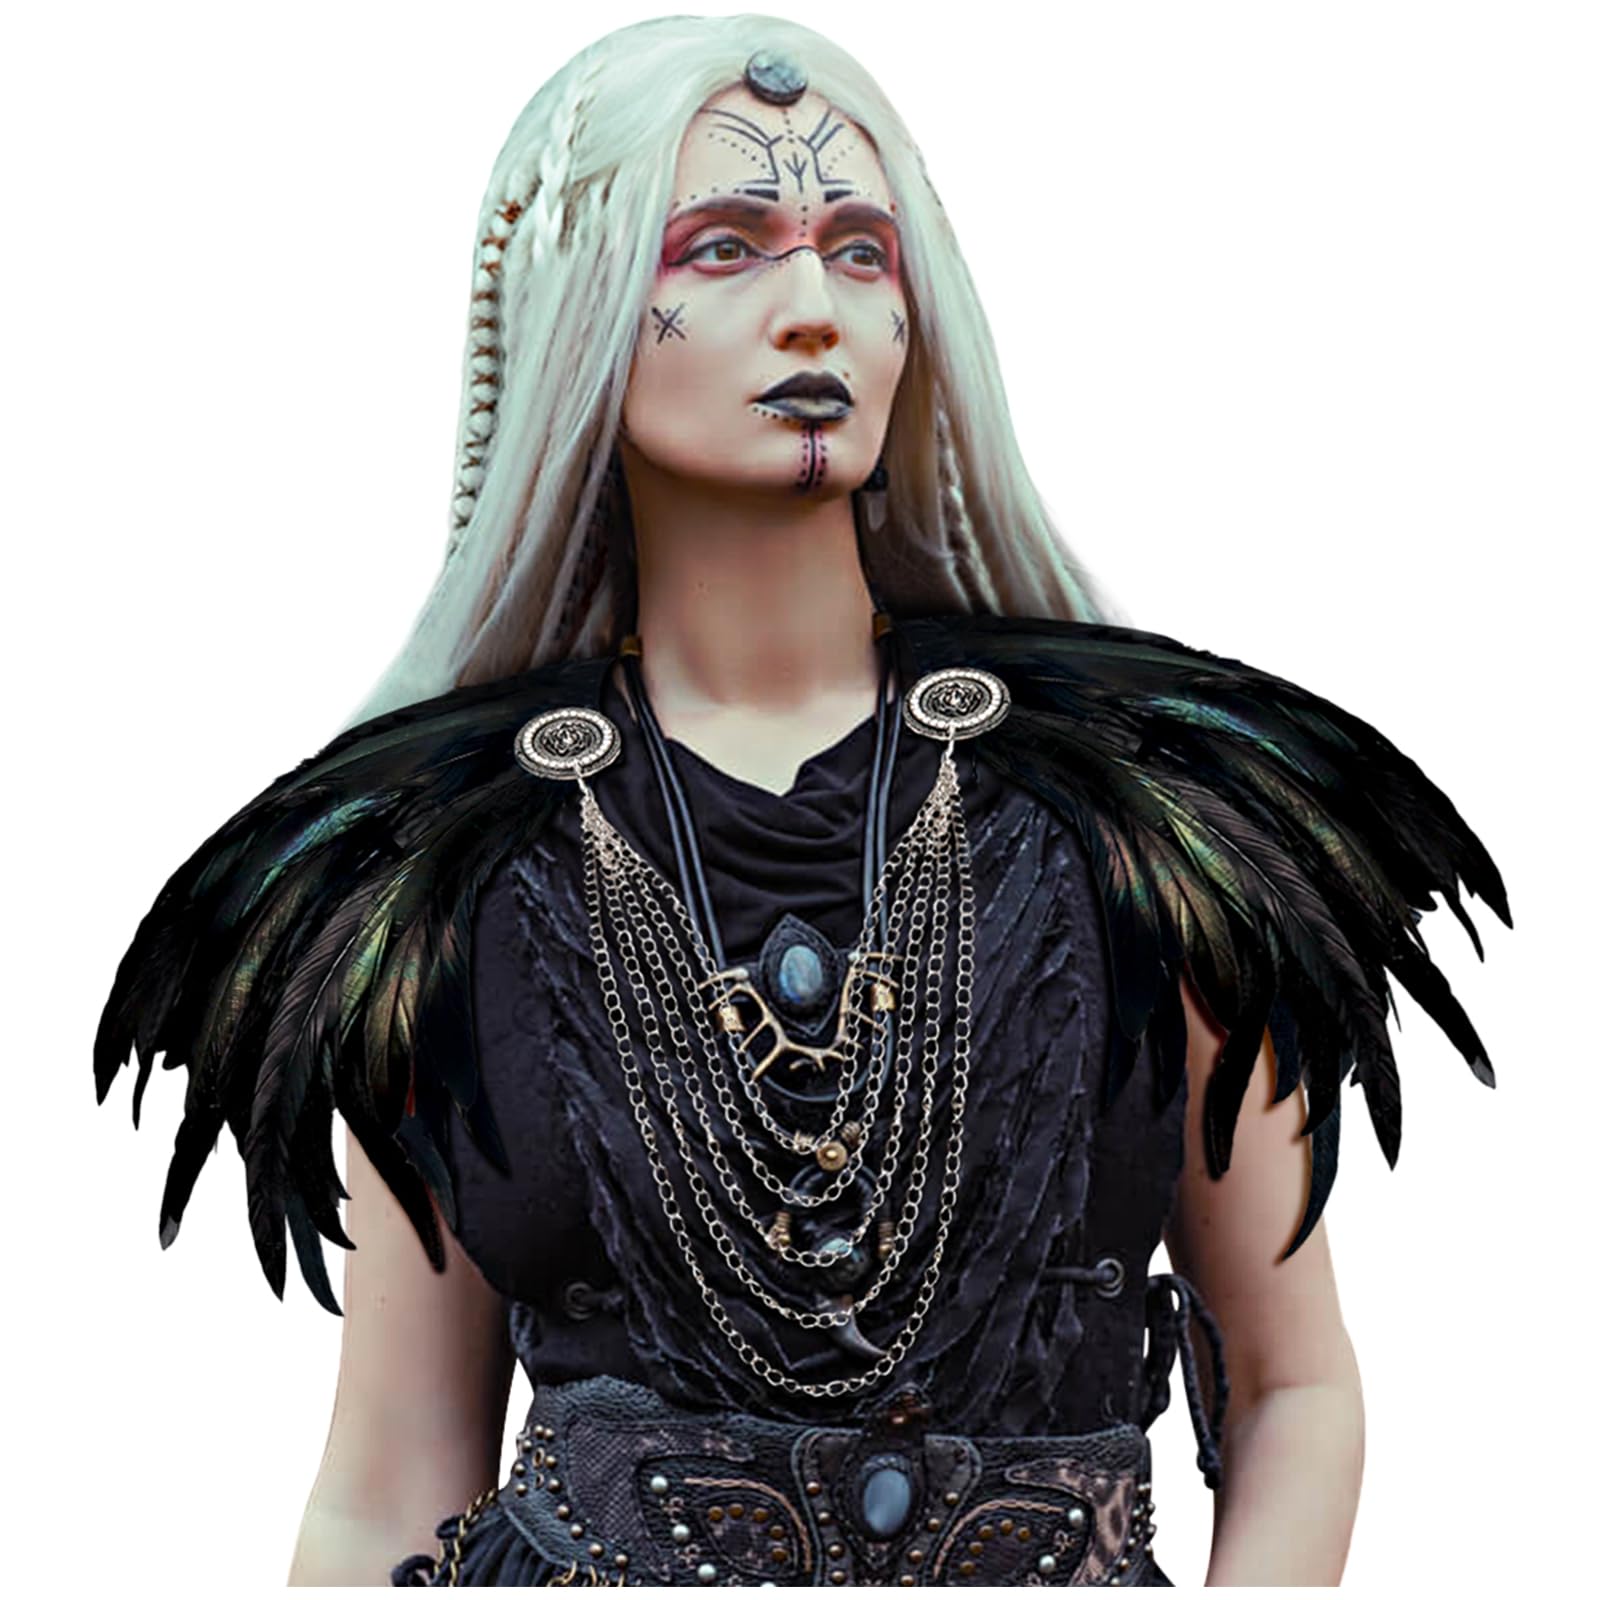 L'VOW Gothic Black Feather Shrug Cape Shawl Halloween Costume for Men